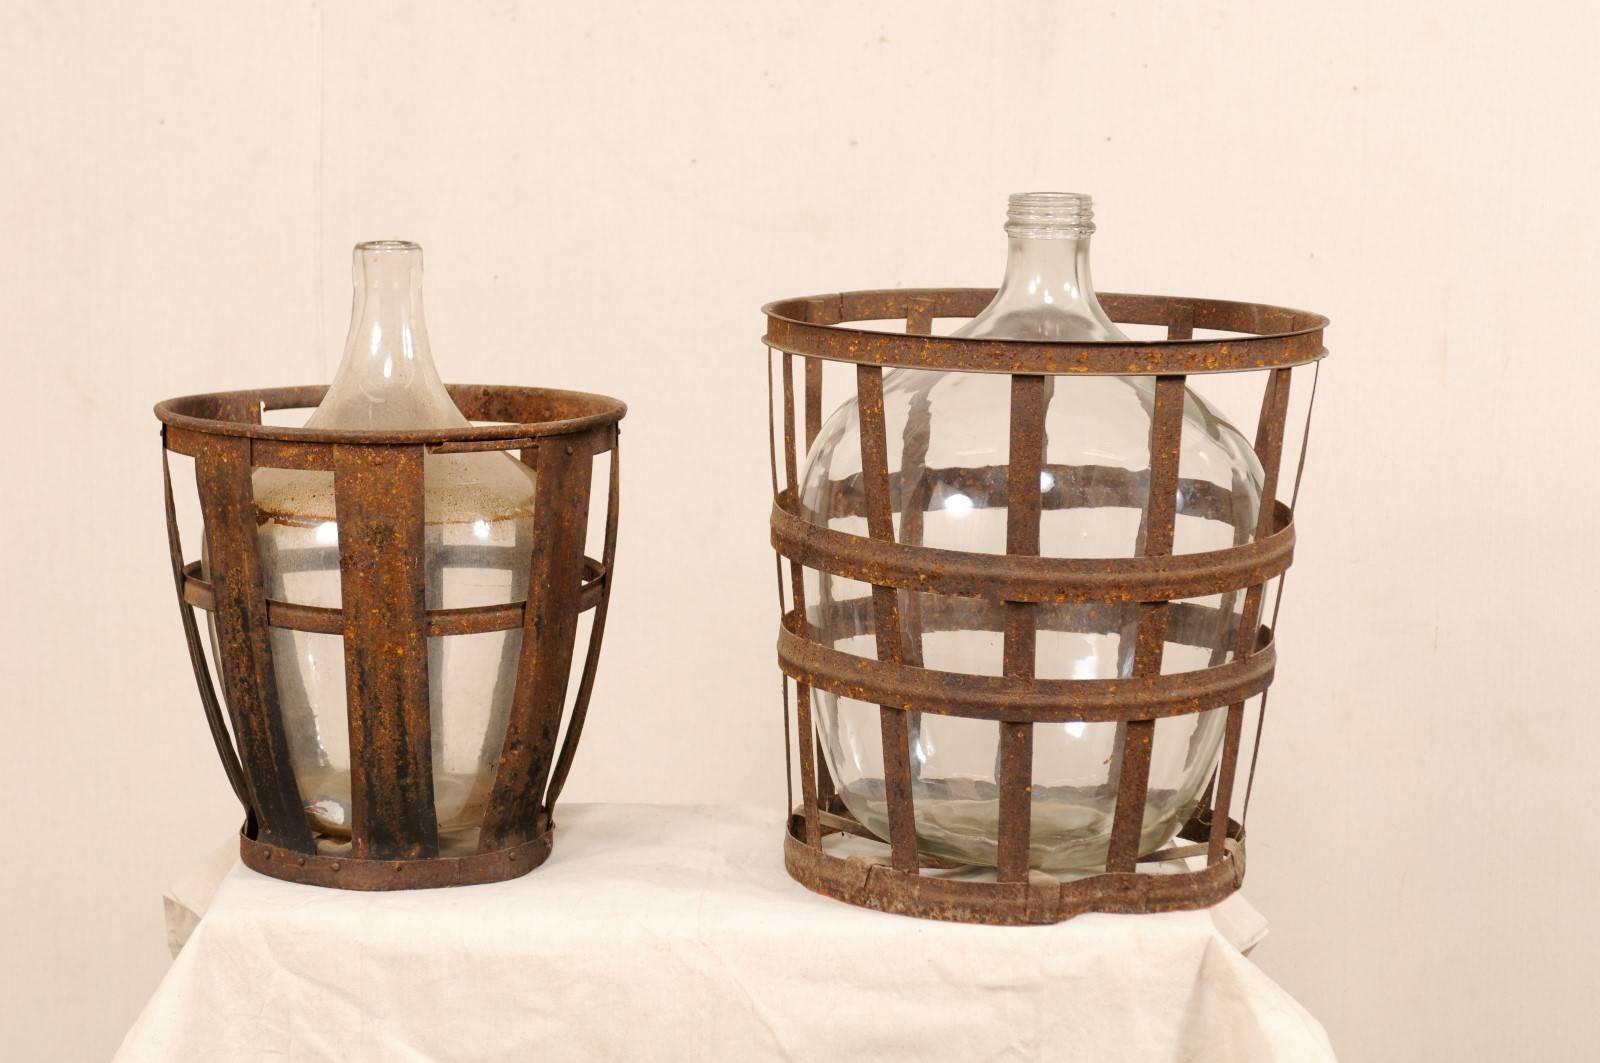 Pair of French Mid-20th Century Vintner Iron Baskets with Demijohn Wine Bottles 2